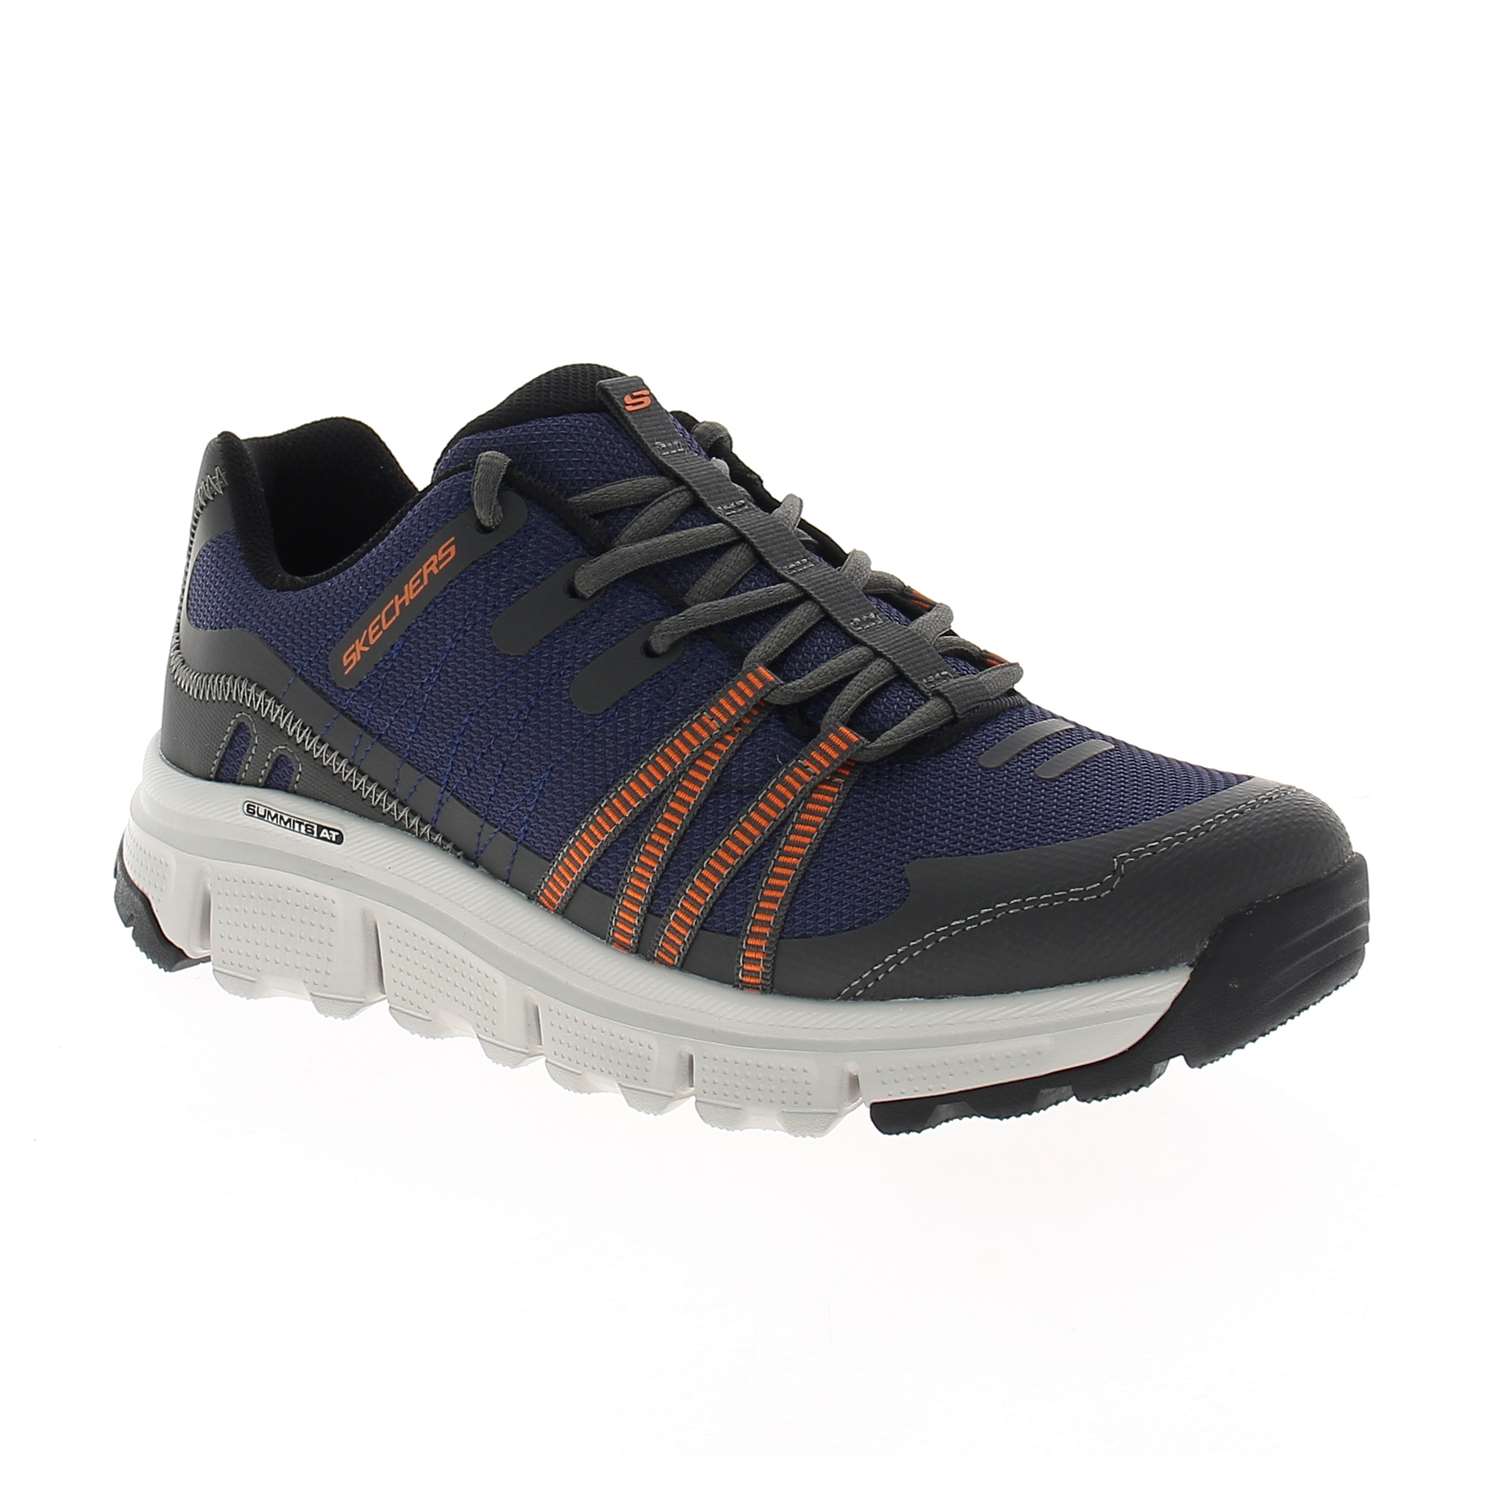 01 - SUMMITS AT - SKECHERS -  - Textile